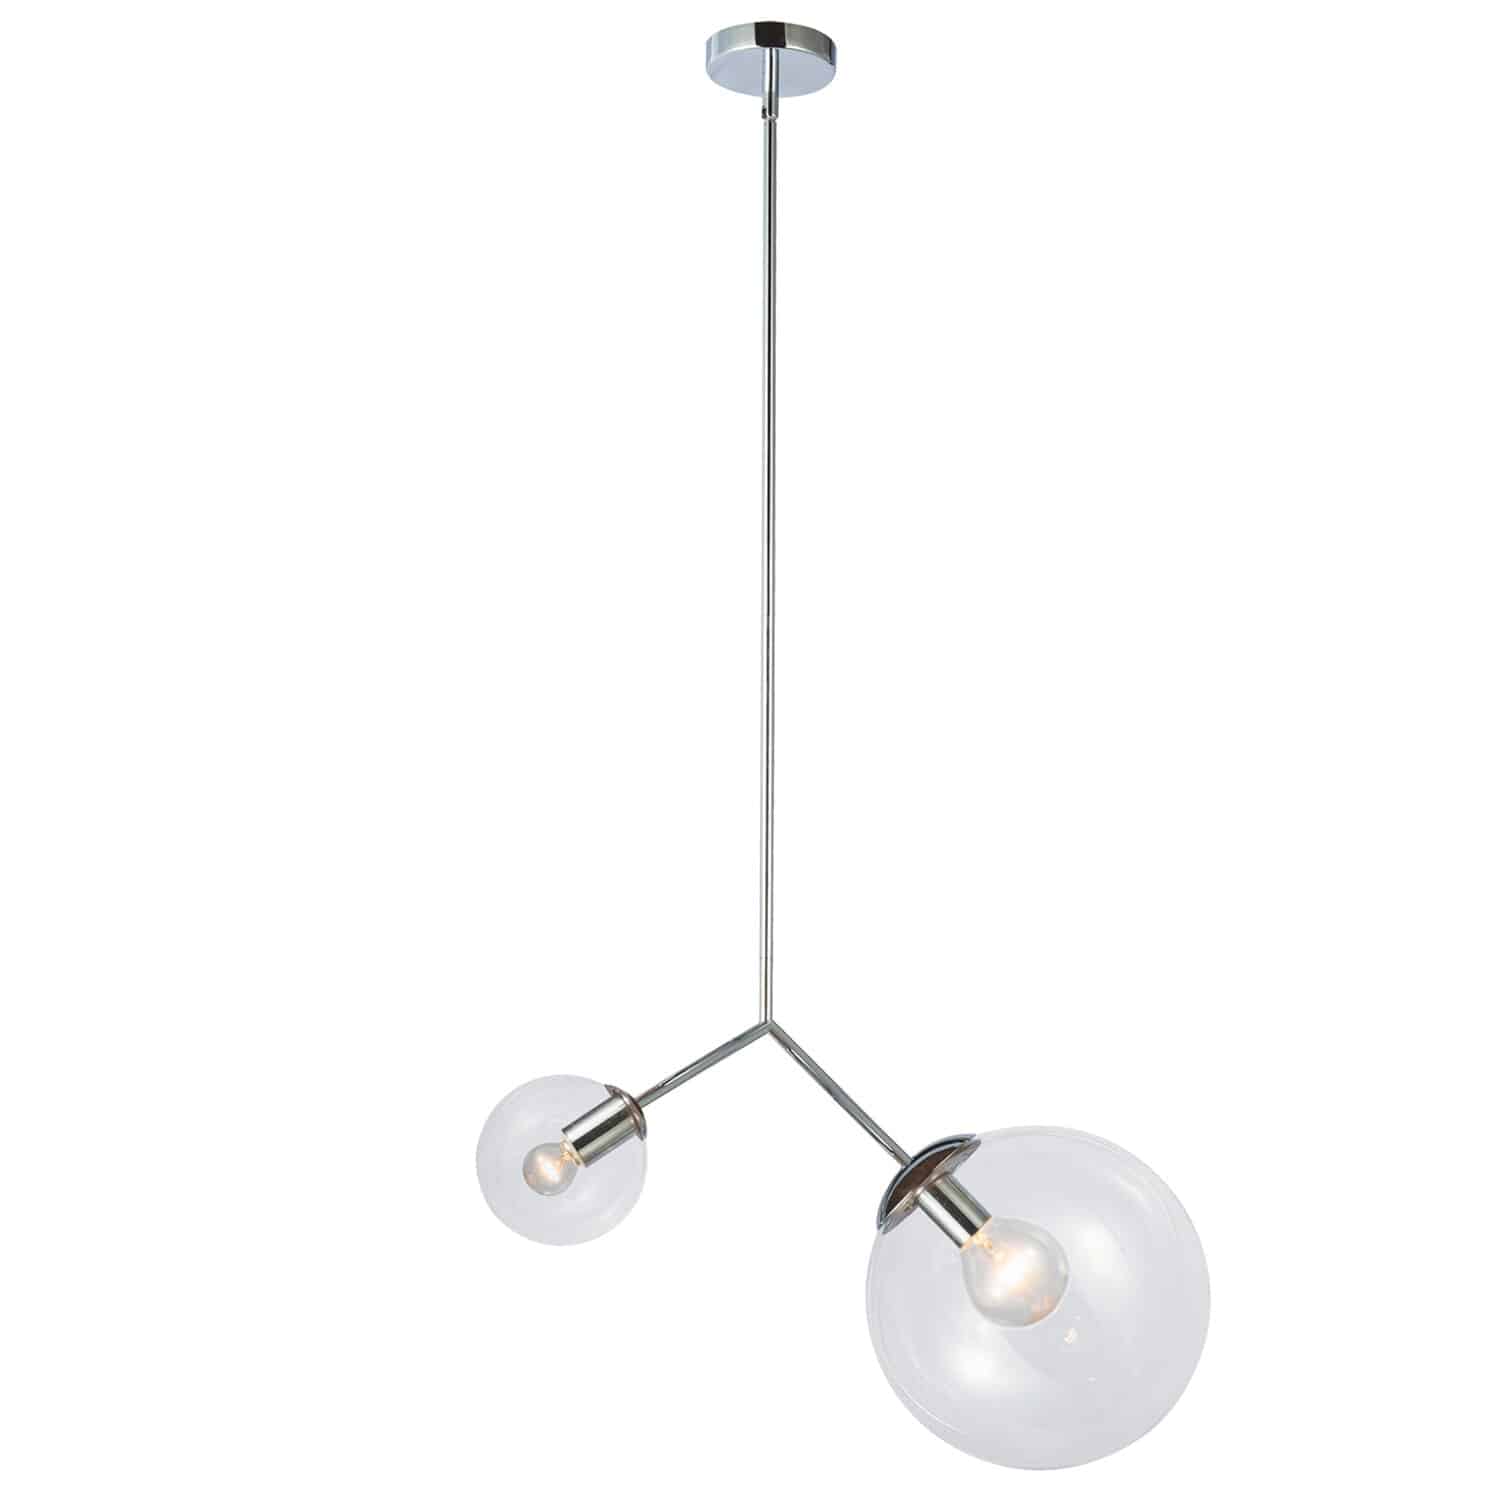 Inspired by the beauty of celestial shapes, the Orion family of lighting contrasts linear elements with glass globes for a space age sense of style. The design comes in a variety of configurations, including straight drops as well as horizontal options. The metal frame in your choice of finish features elegant straight lines in a geometric pattern. The glass globe lights are set inside the design in a variety of eye-catching configurations, according to the format. Orion lighting adds a thoroughly contemporary element of style to your living or dining rooms, or a chic bedroom.